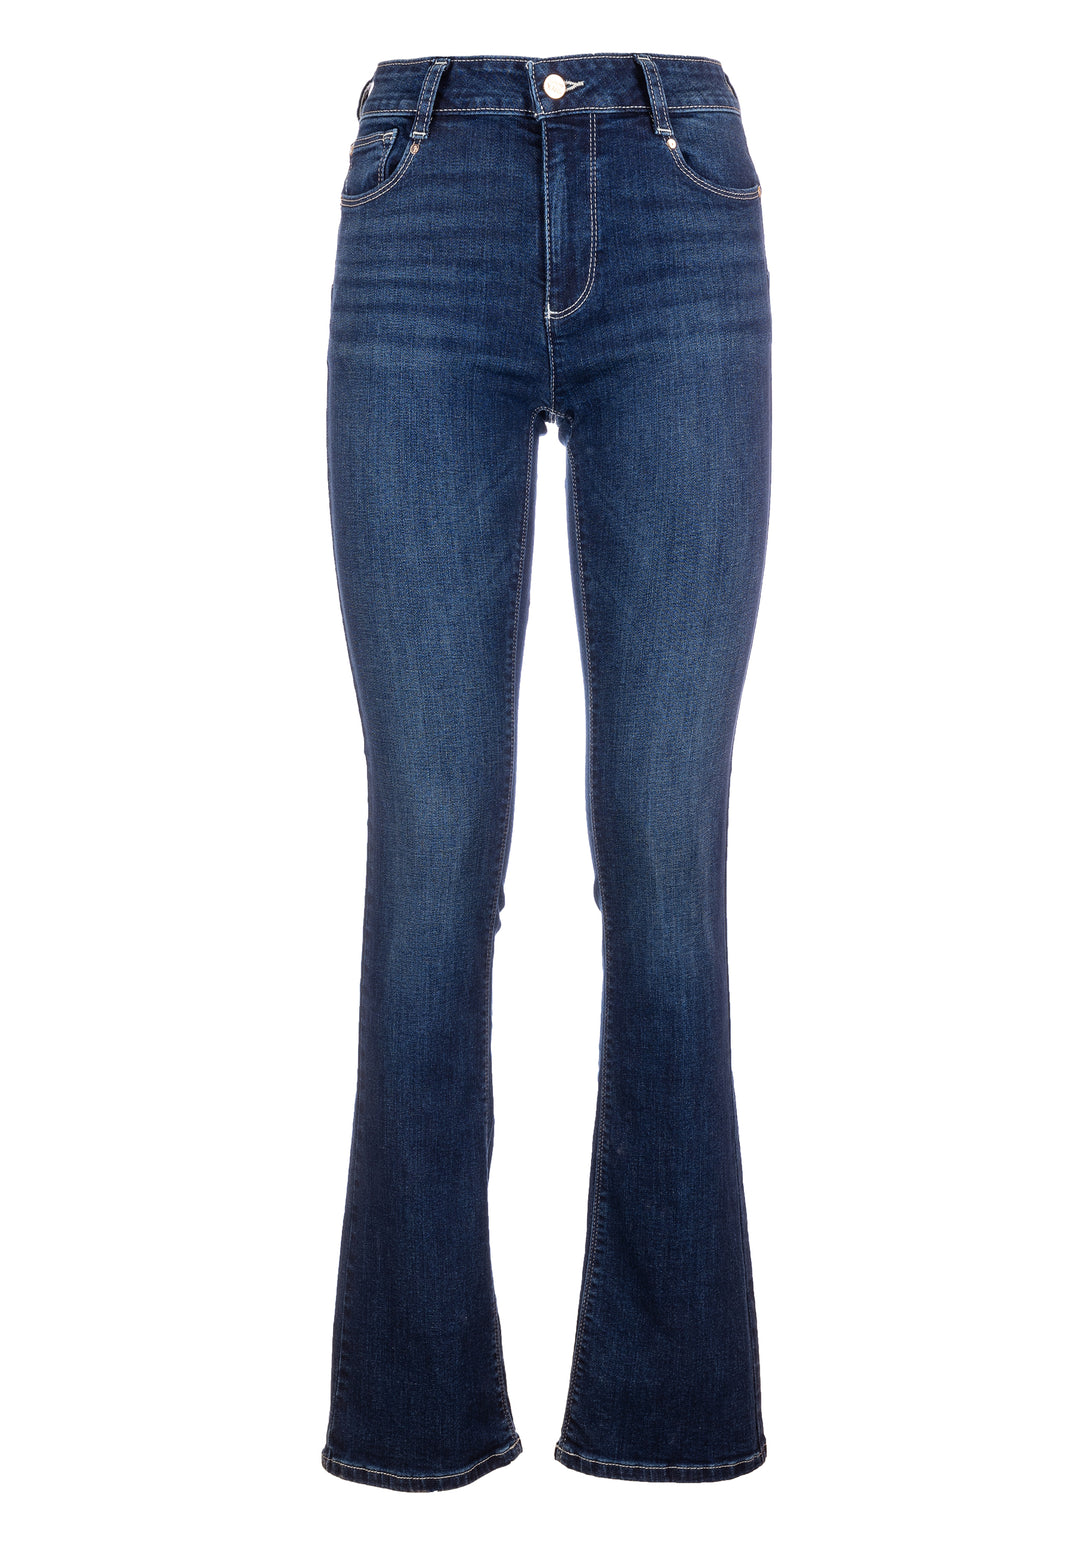 Jeans bootcut with push up effect made in denim with dark wash